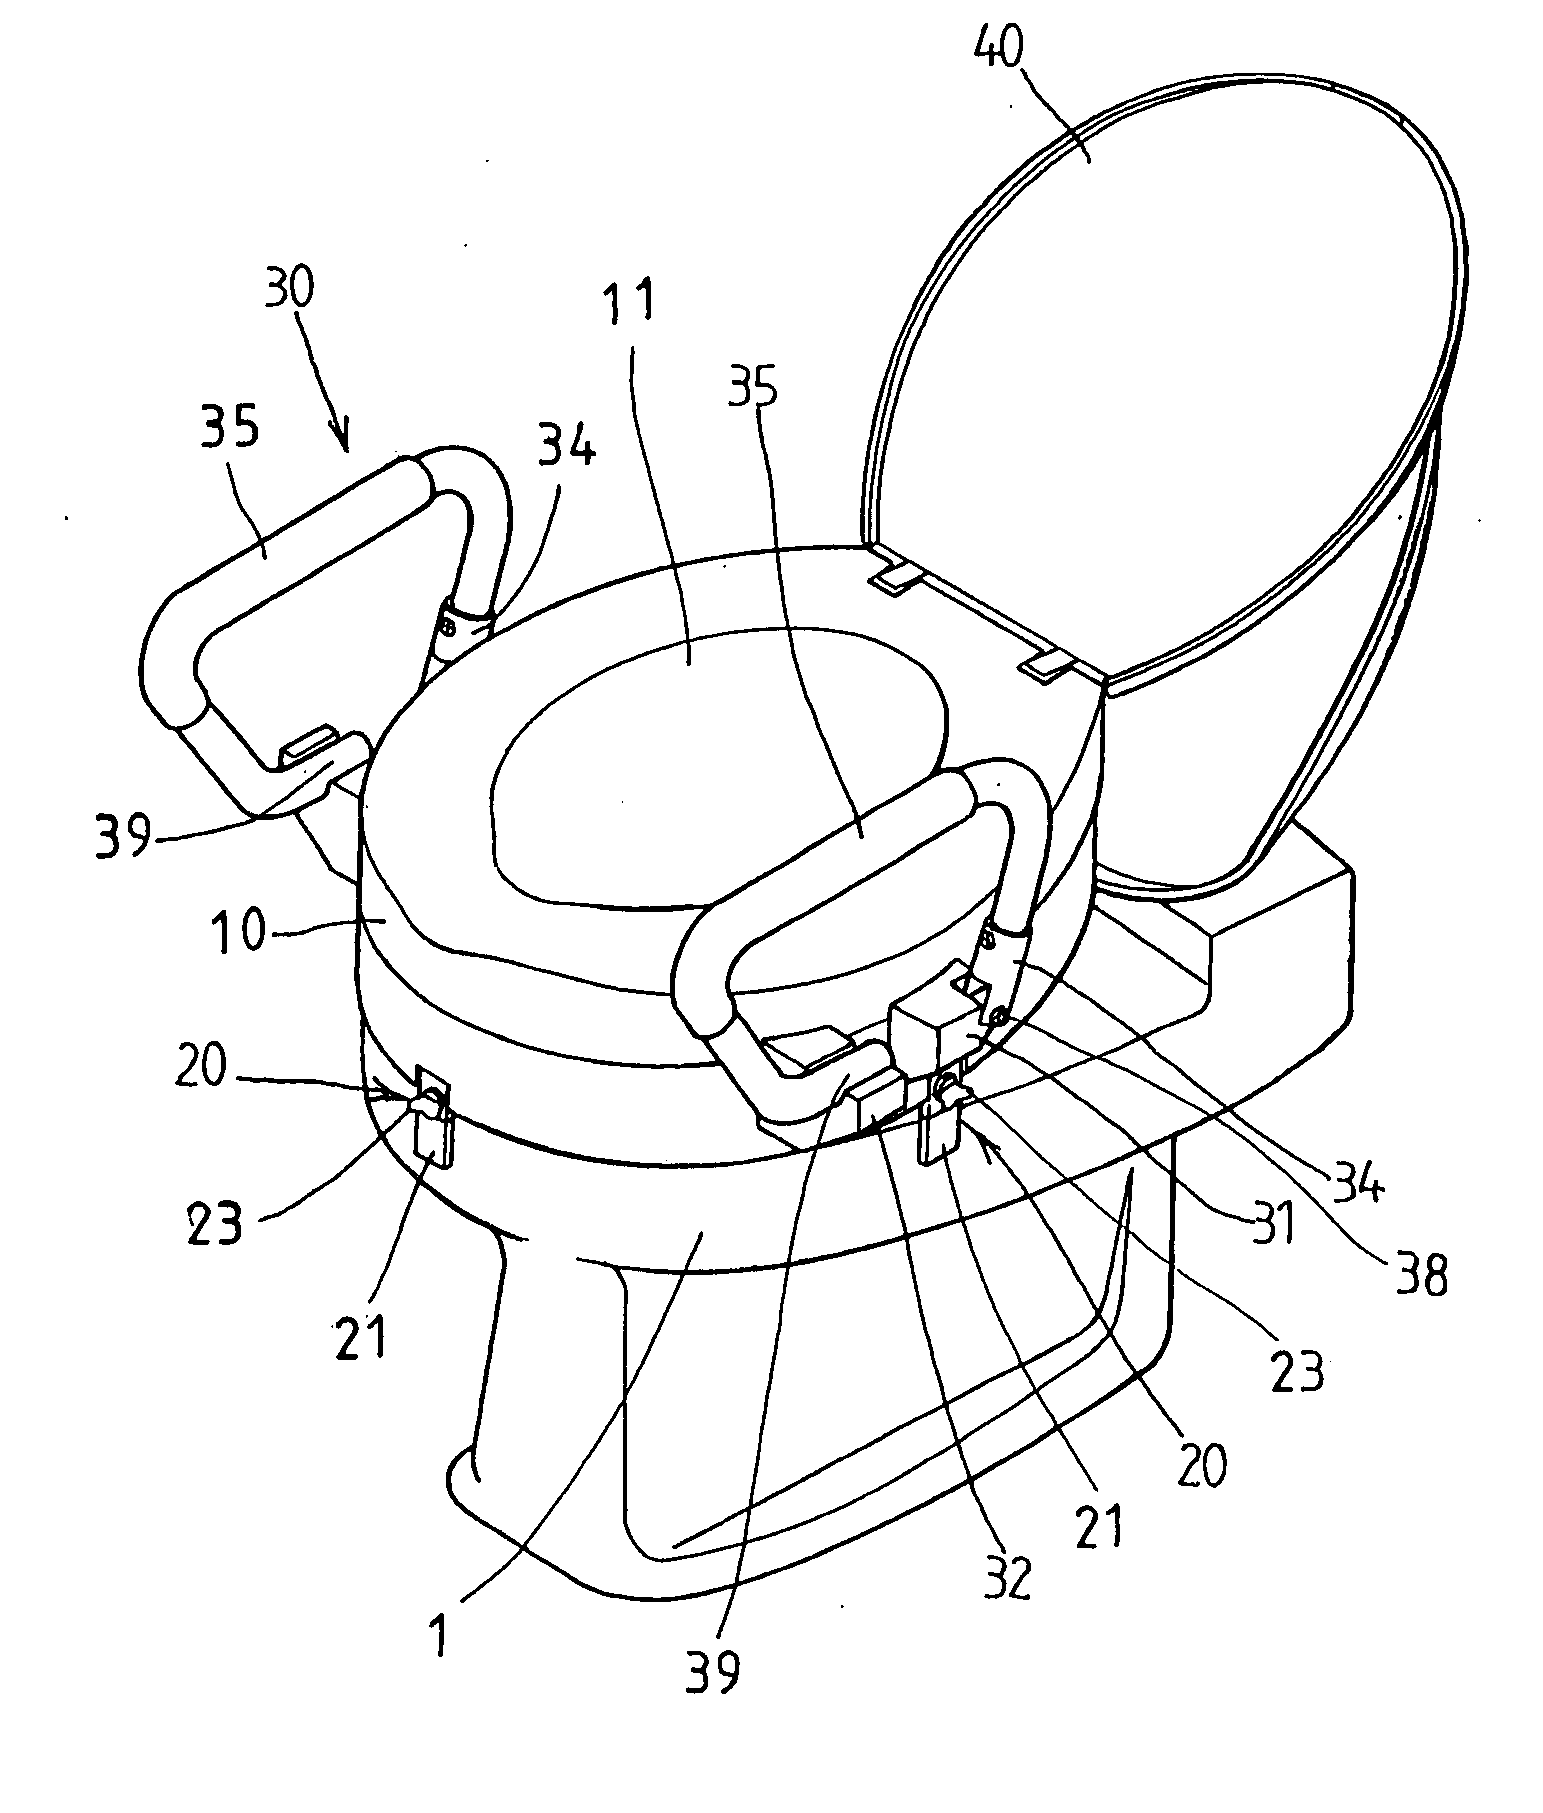 Toilet seat device for disabled person